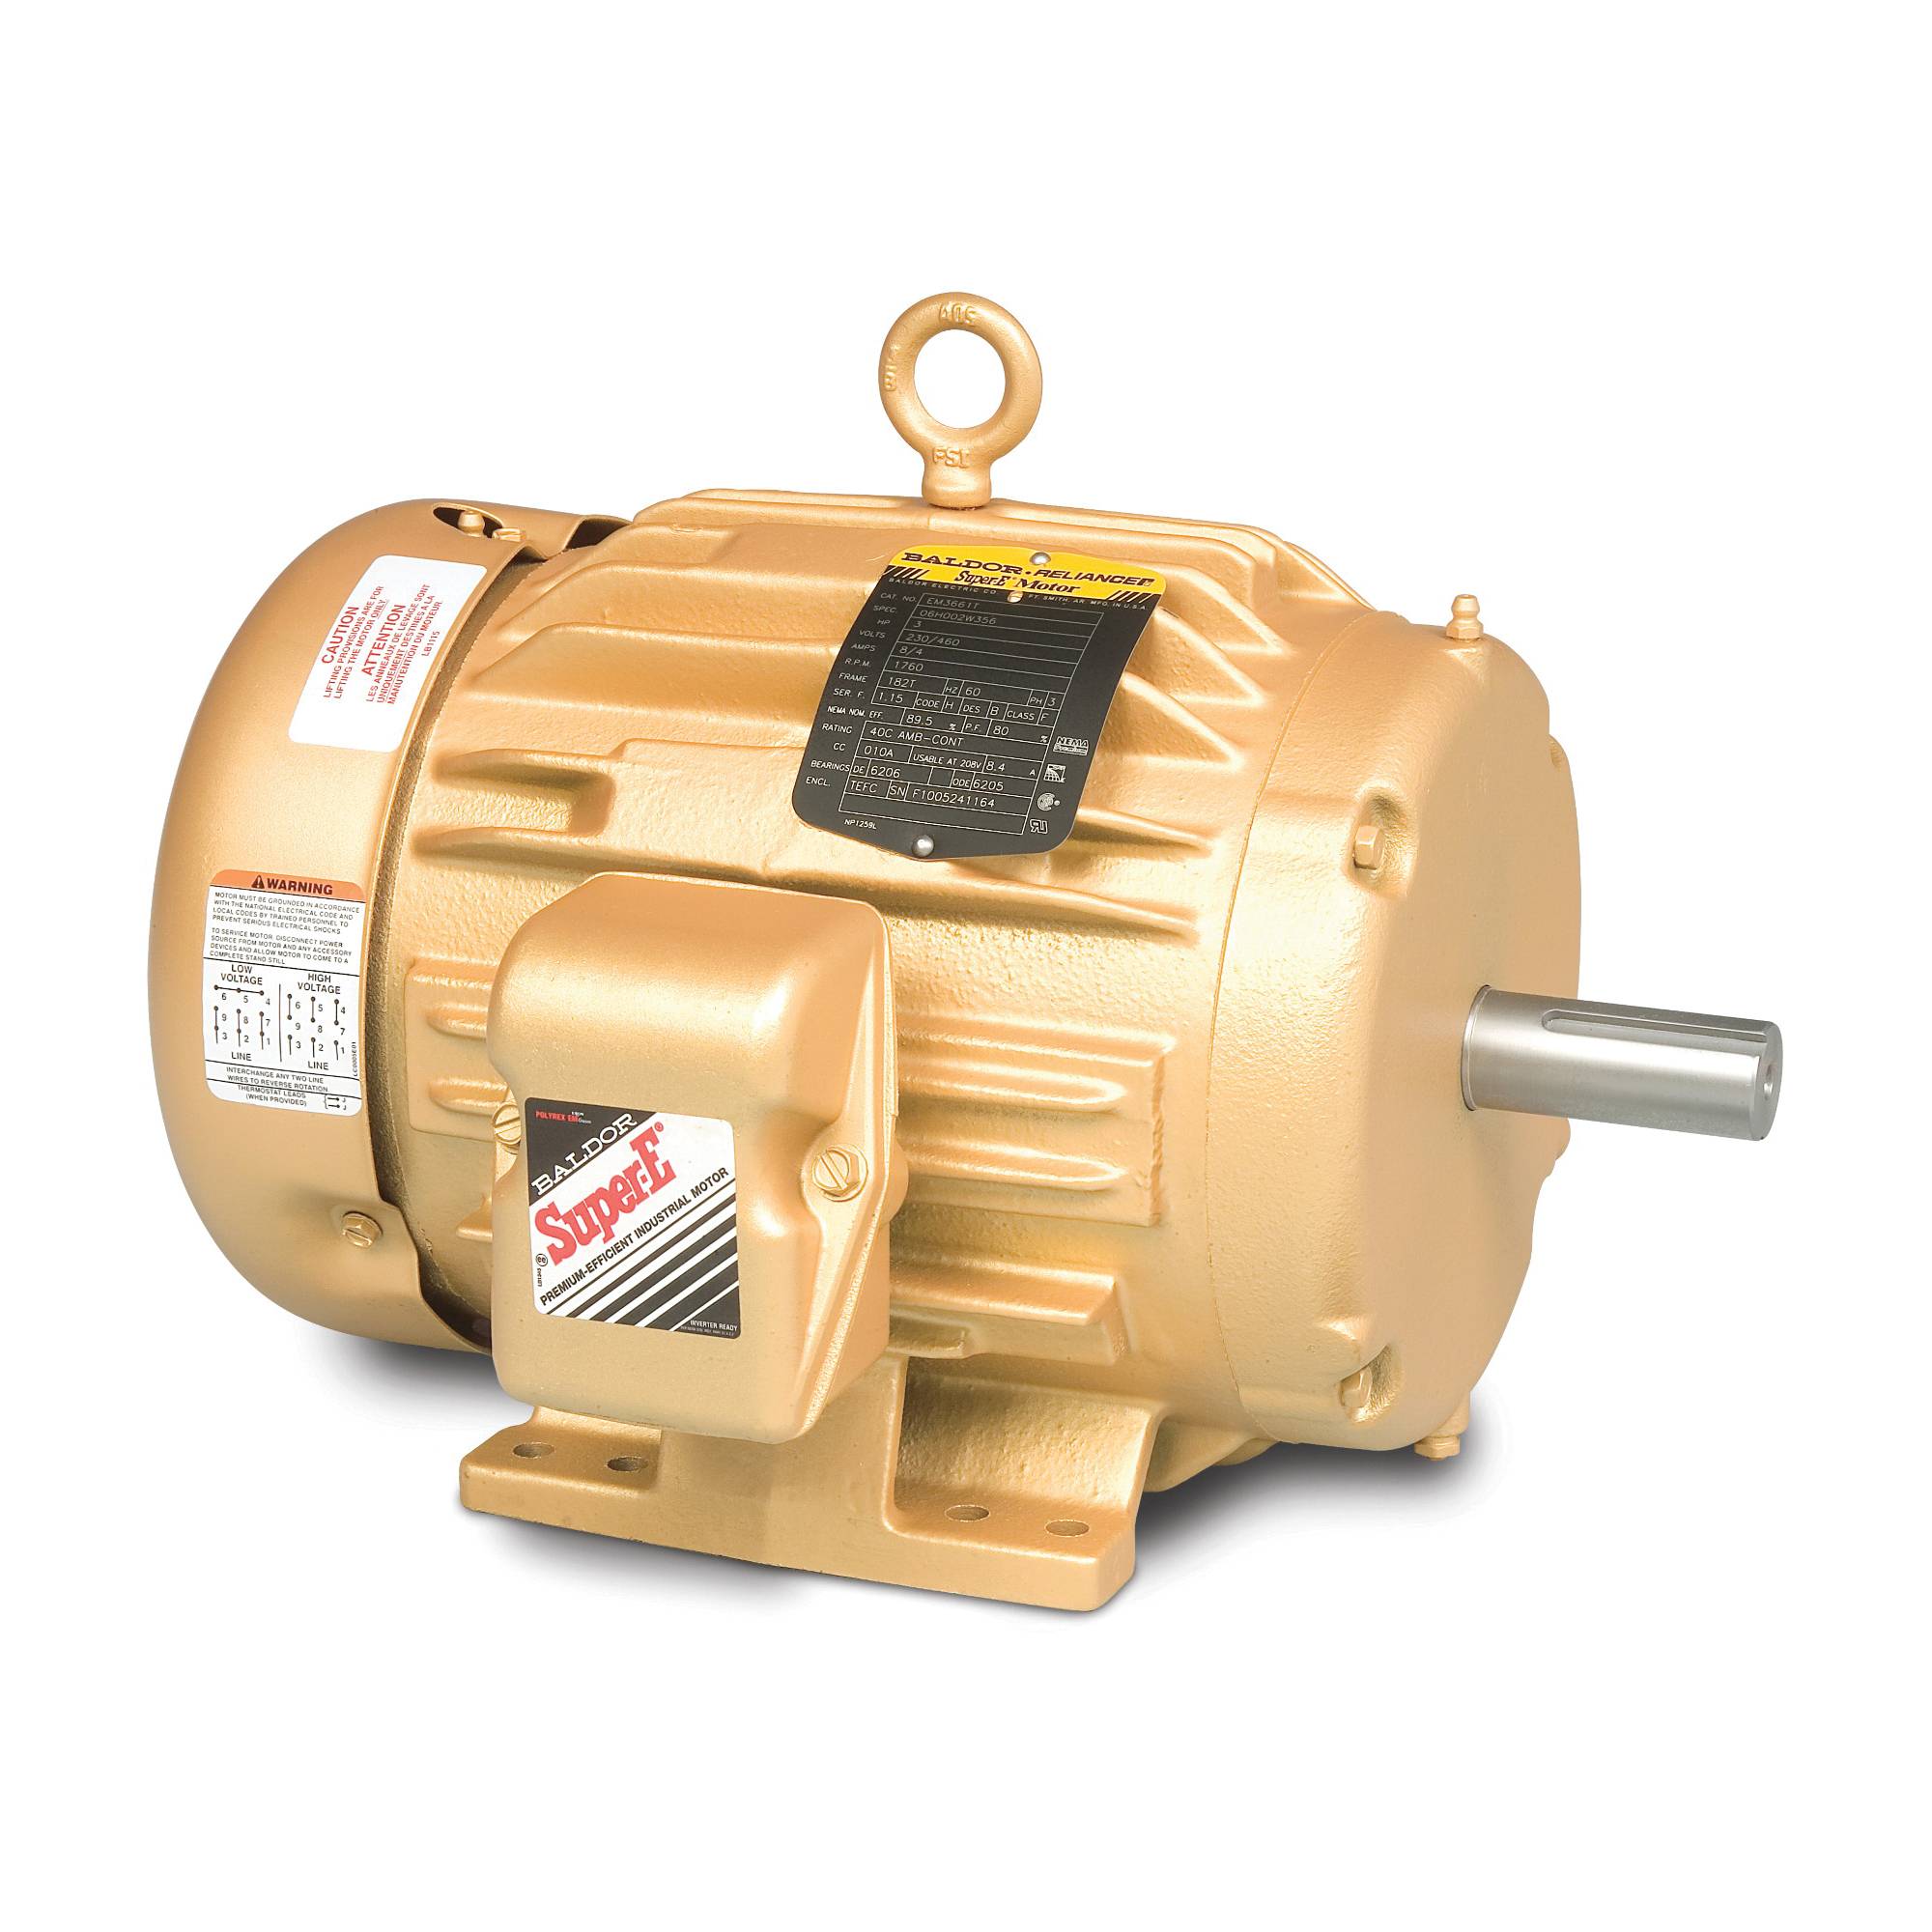 Baldor-Reliance Super-E® EM4114T Type 1252M Continuous Duty AC Motor, Totally Enclosed Fan Cooled Enclosure, 50 hp, 208/230/460 VAC, 60 Hz, 3 Phase, 326TS Frame, 3540 rpm Speed, Foot Rigid Mount